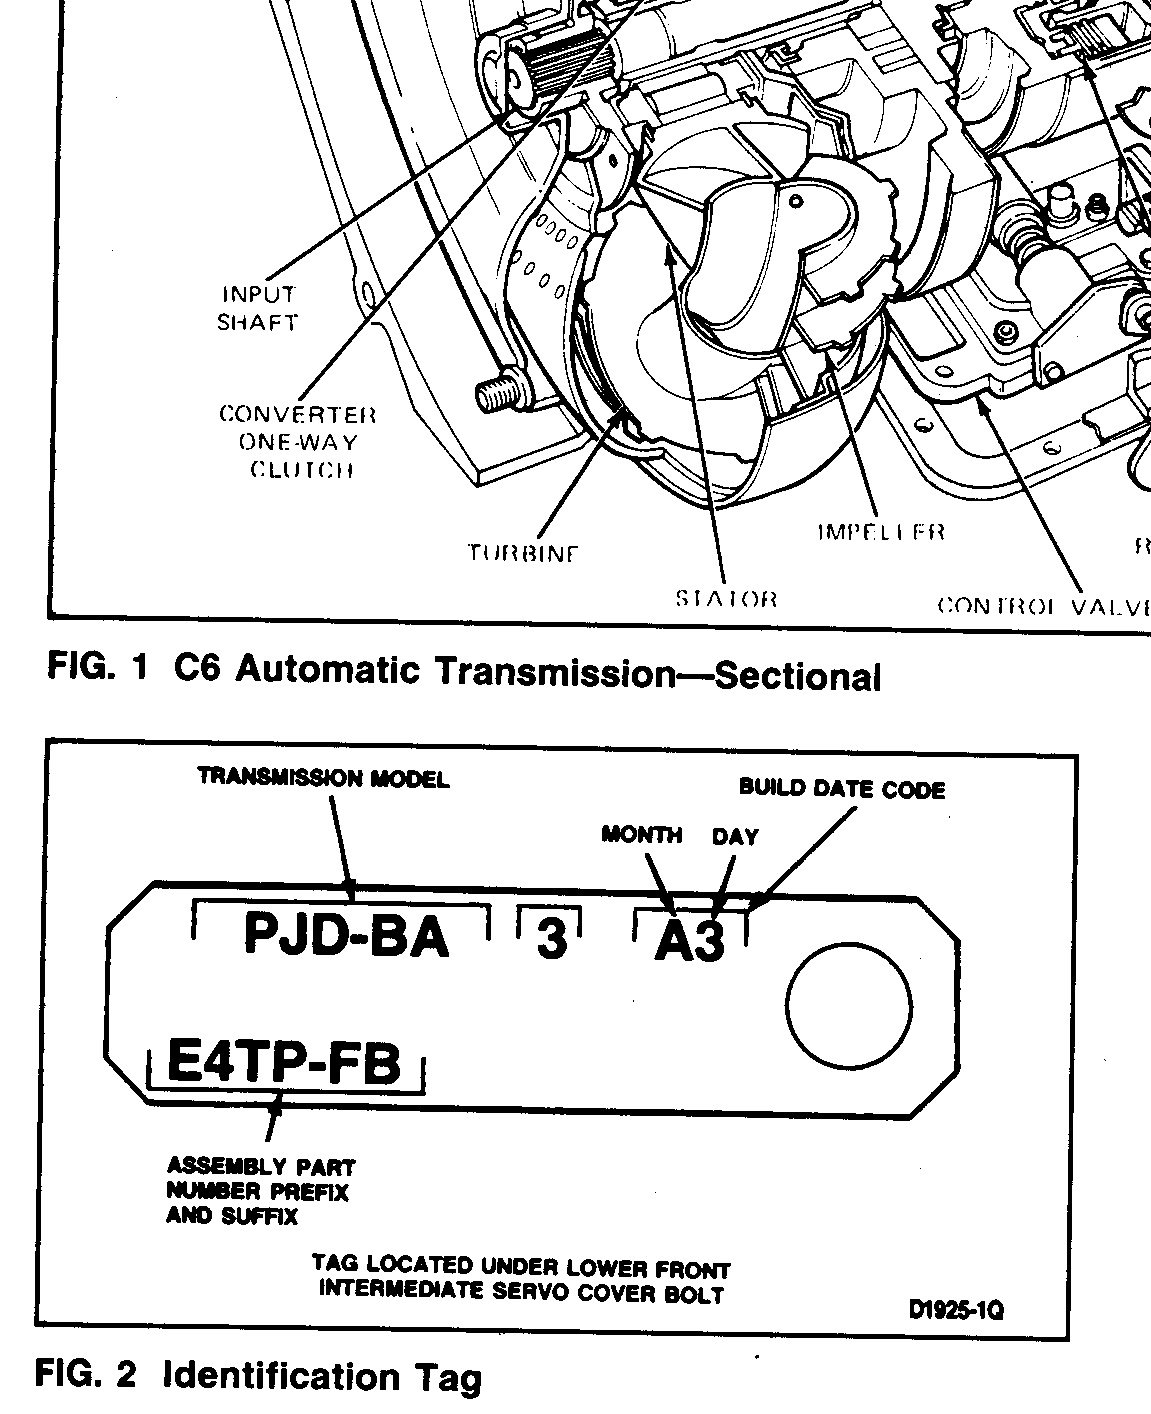 Transmission ID tag ?? 80 96 Ford Bronco Tech Support 66 96 